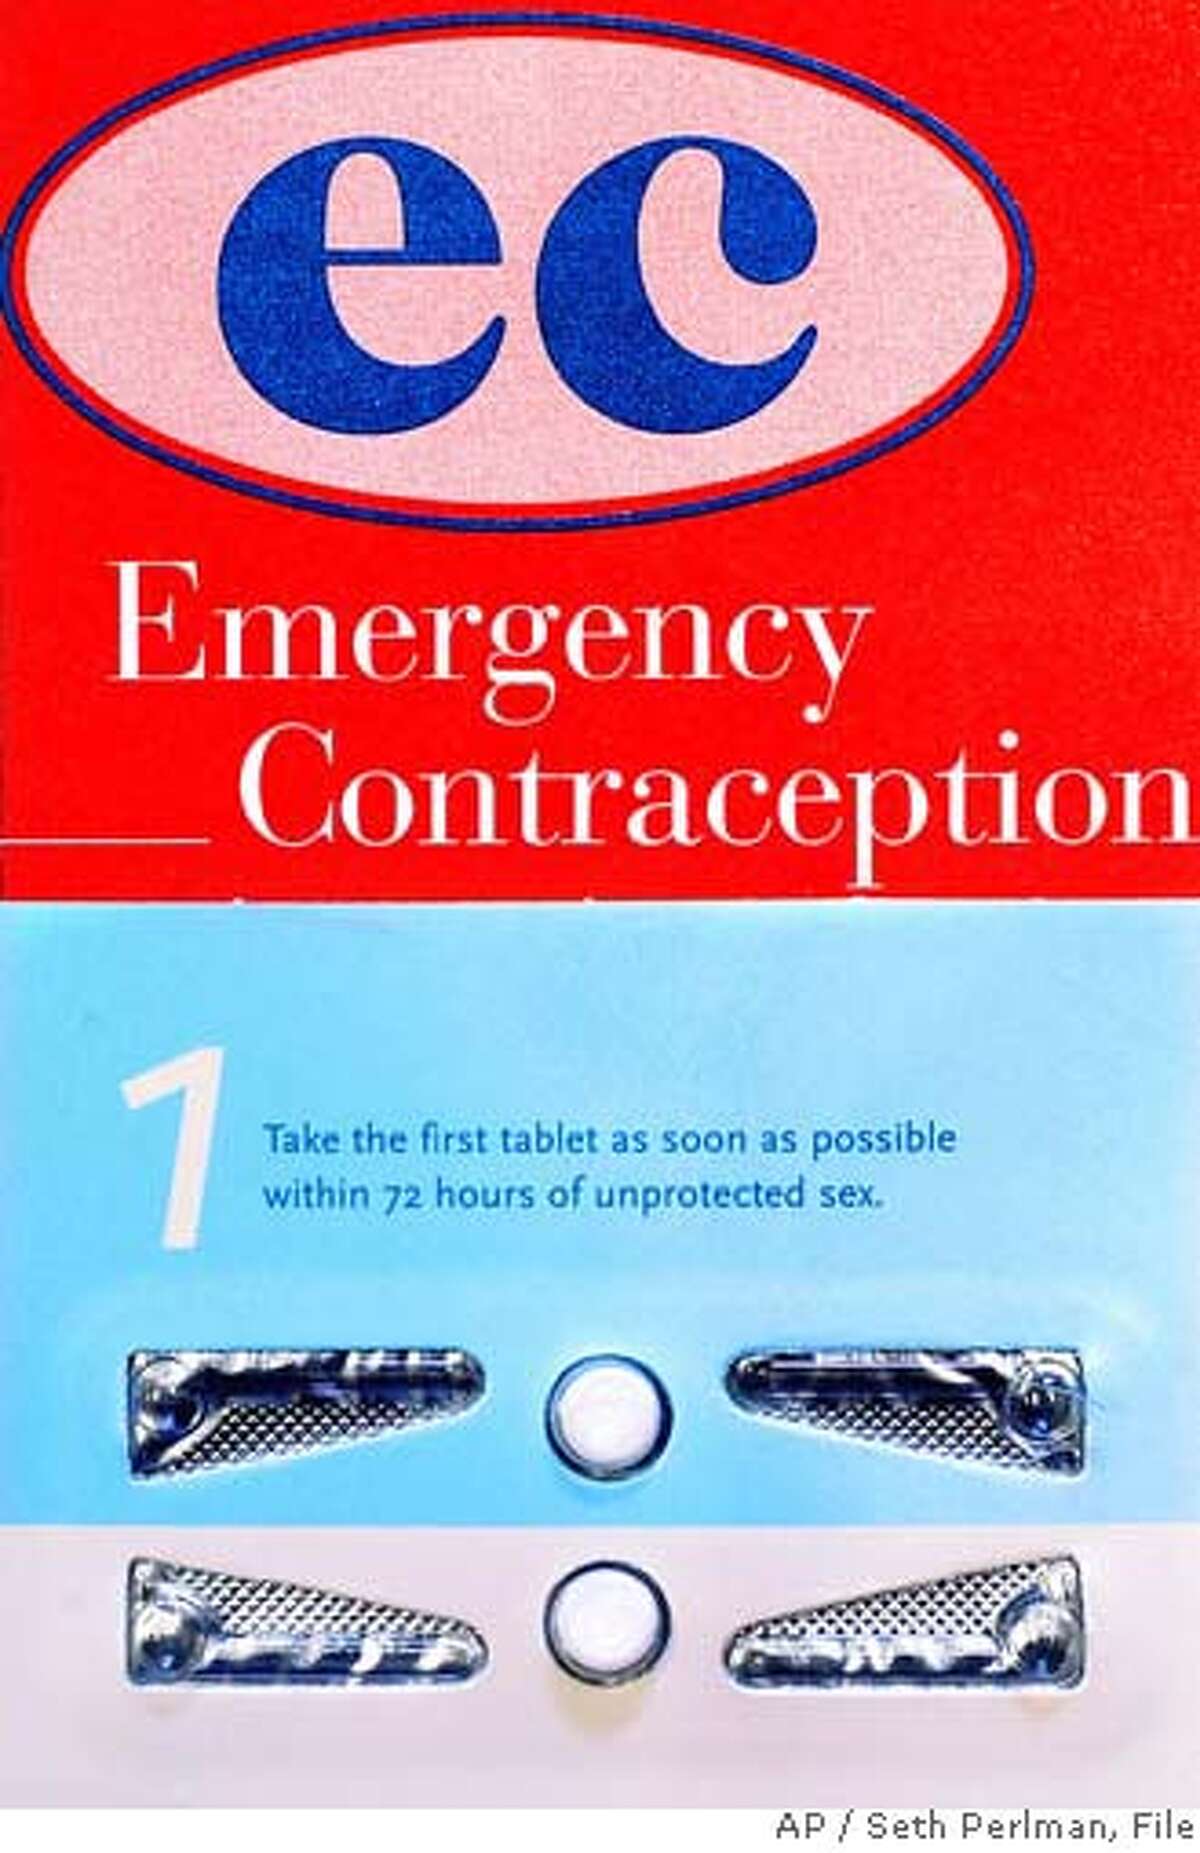 ** FILE ** Emergency Contraception known as Plan B is displayed at Planned Parenthood in Springfield, Ill. in this Feb. 23, 2004 file photo. Women can buy the morning-after pill without a prescription, the government declared Thursday, Aug. 24, 2006, a major step that nevertheless failed to quell the politically charged debate over access to emergency contraception. (AP Photo/Seth Perlman, File) FEB. 23, 2004 FILE PHOTO